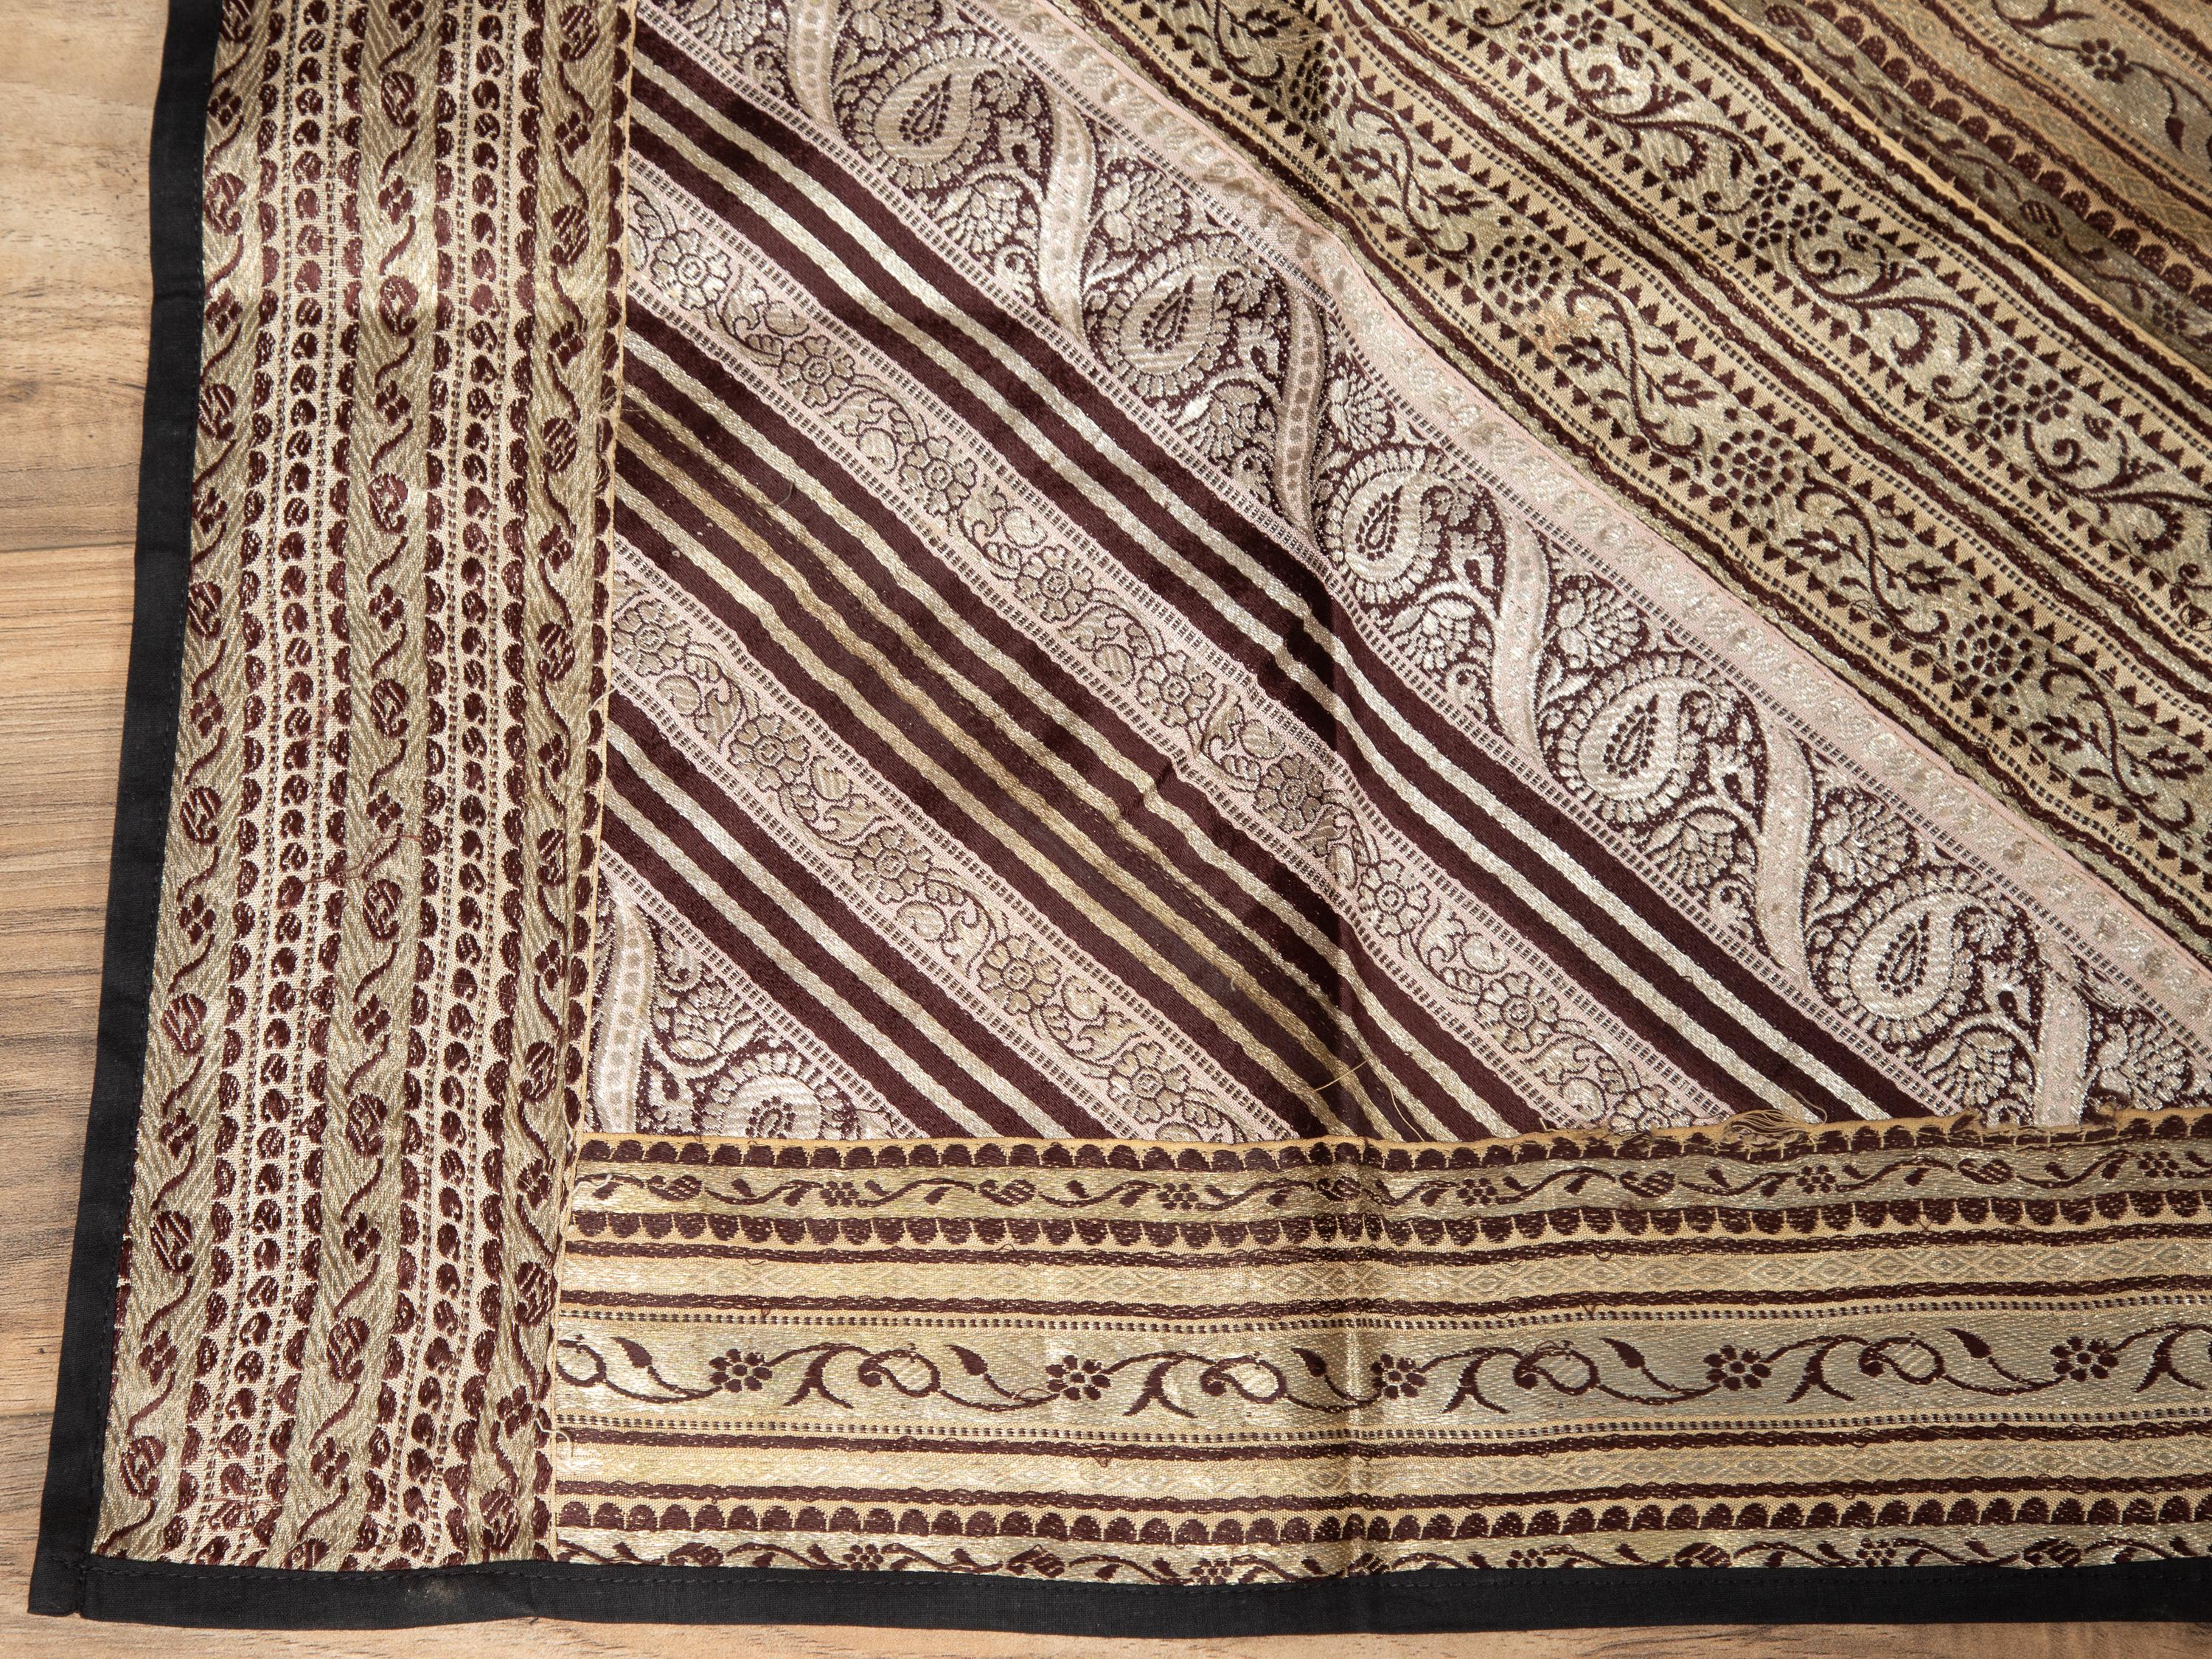 20th Century Vintage Indian Silk Embroidered Fabric with Gold, Silver and Maroon Tones